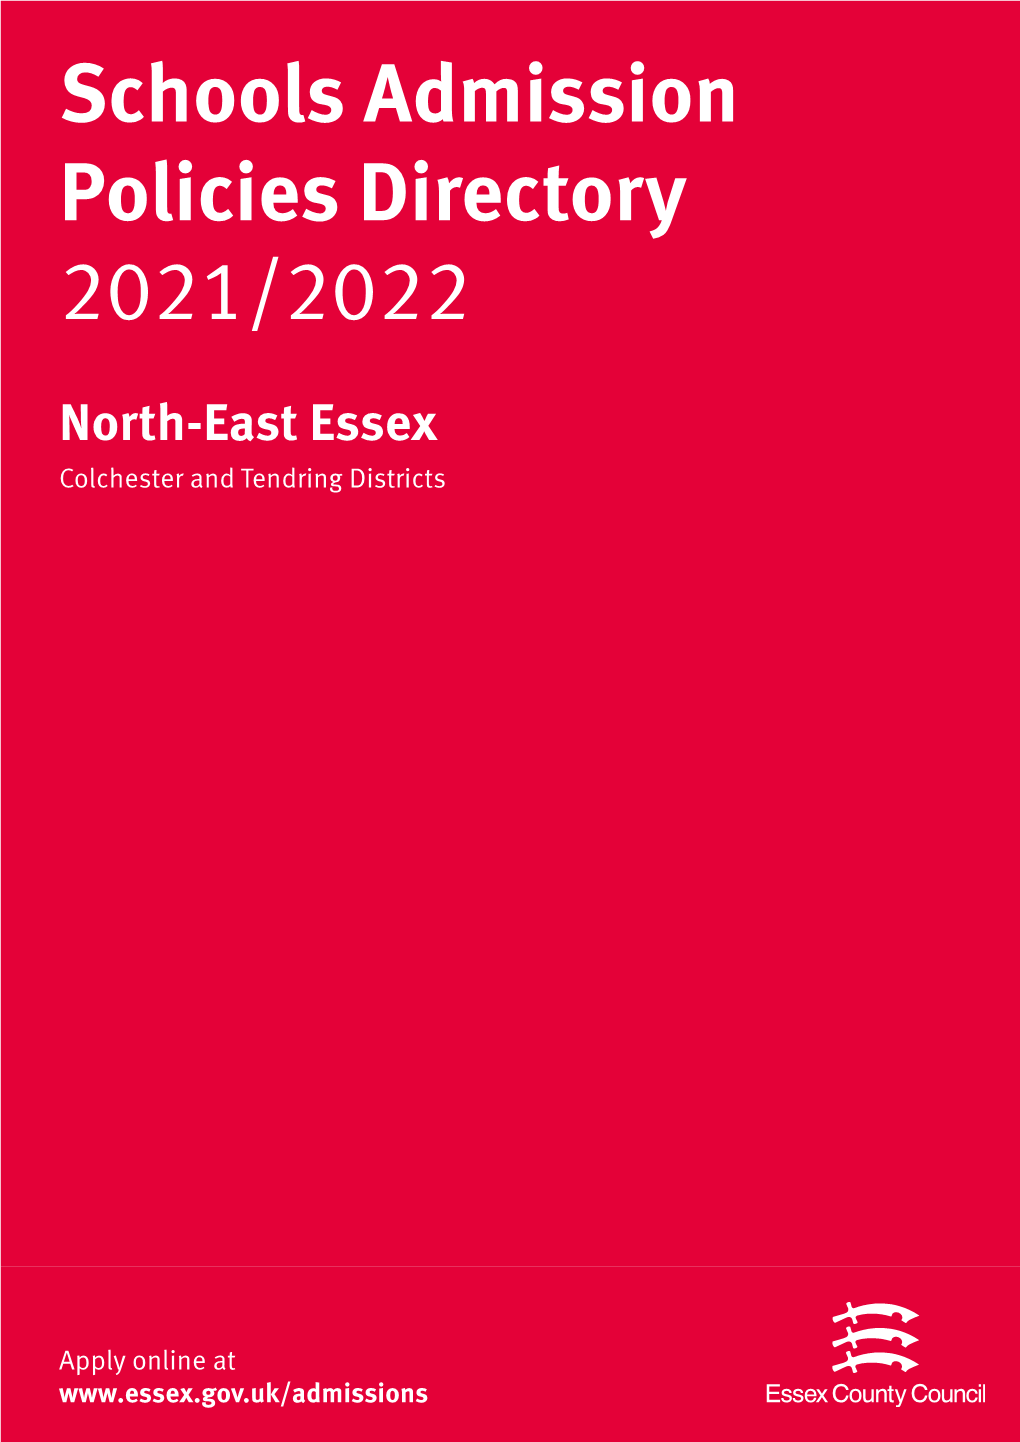 Primary School Admissions Brochure for North-East Essex 2021-22